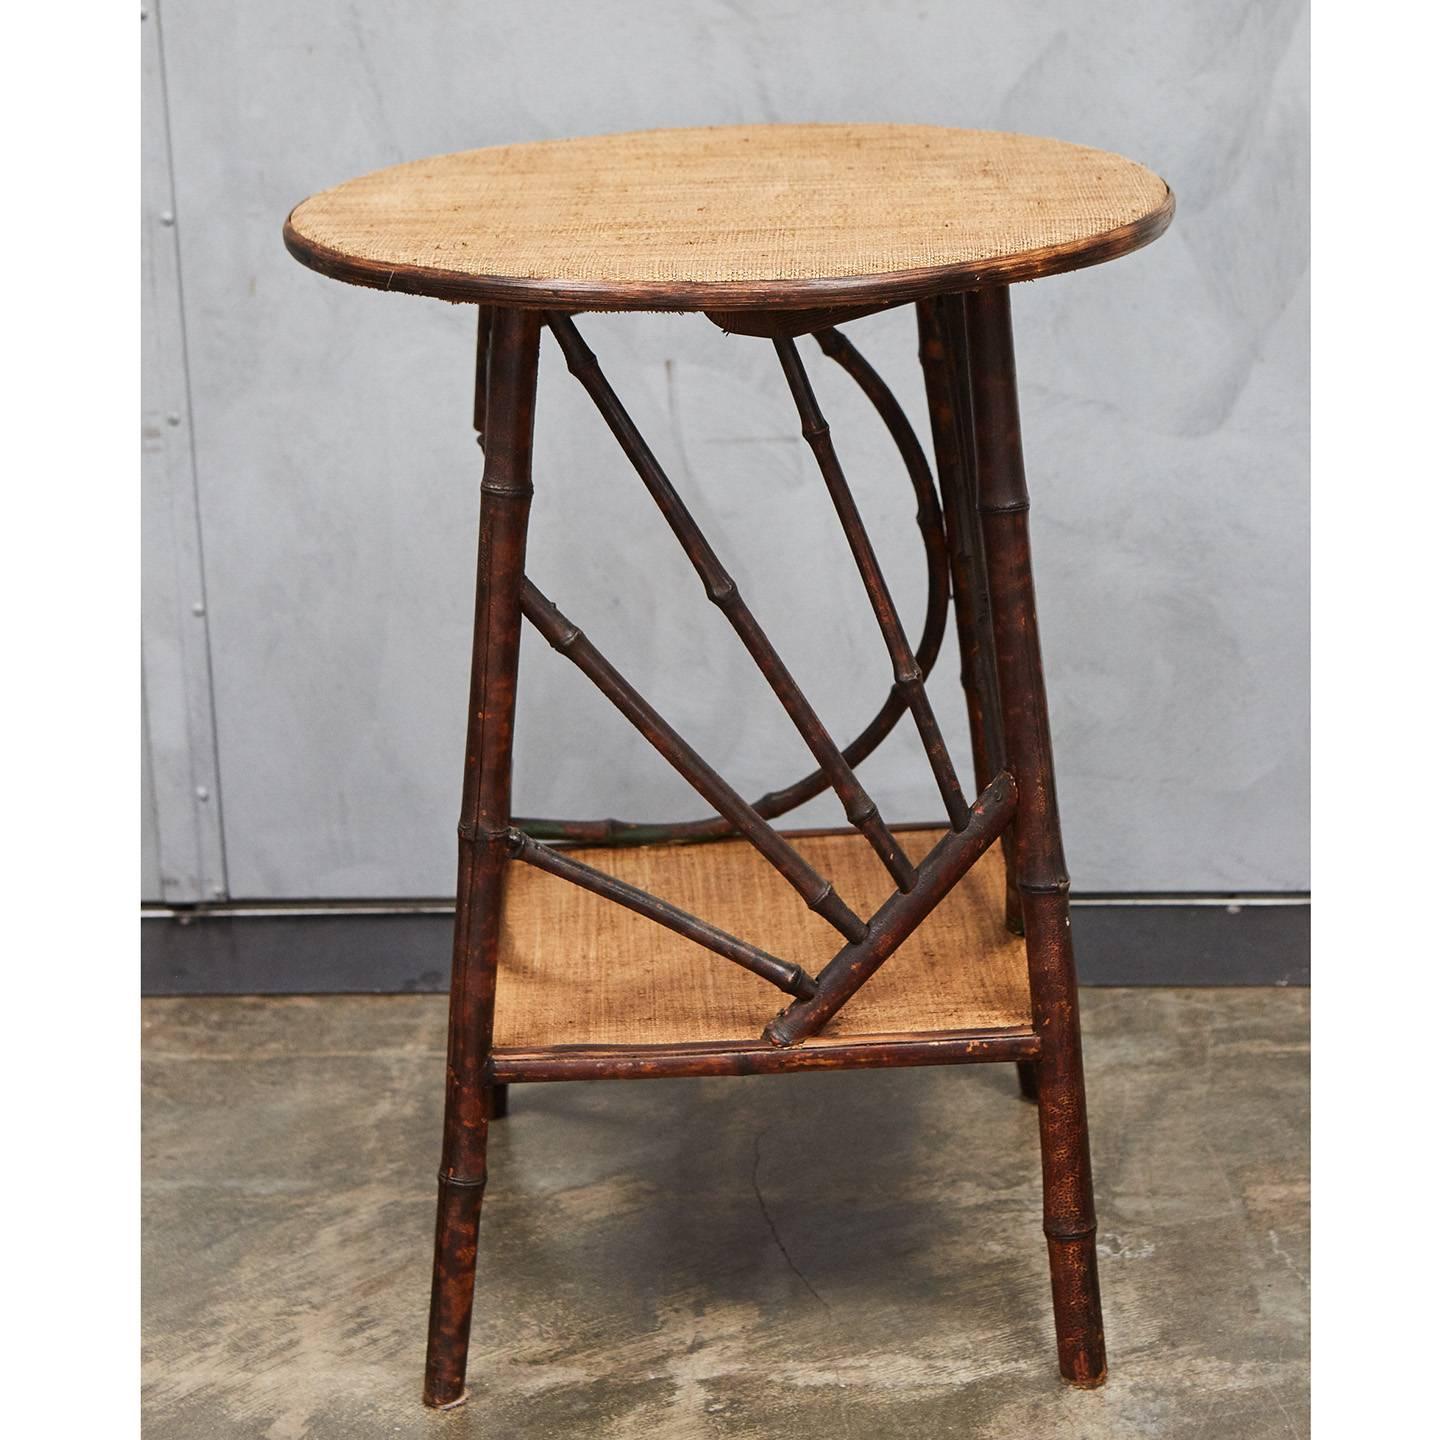 This interesting bamboo table with a circular top has wonderful bentwood elements that create web like supports between the top and shelf. The table has an open side with a turned finial and nicely angled feet. The table has newly installed waxed